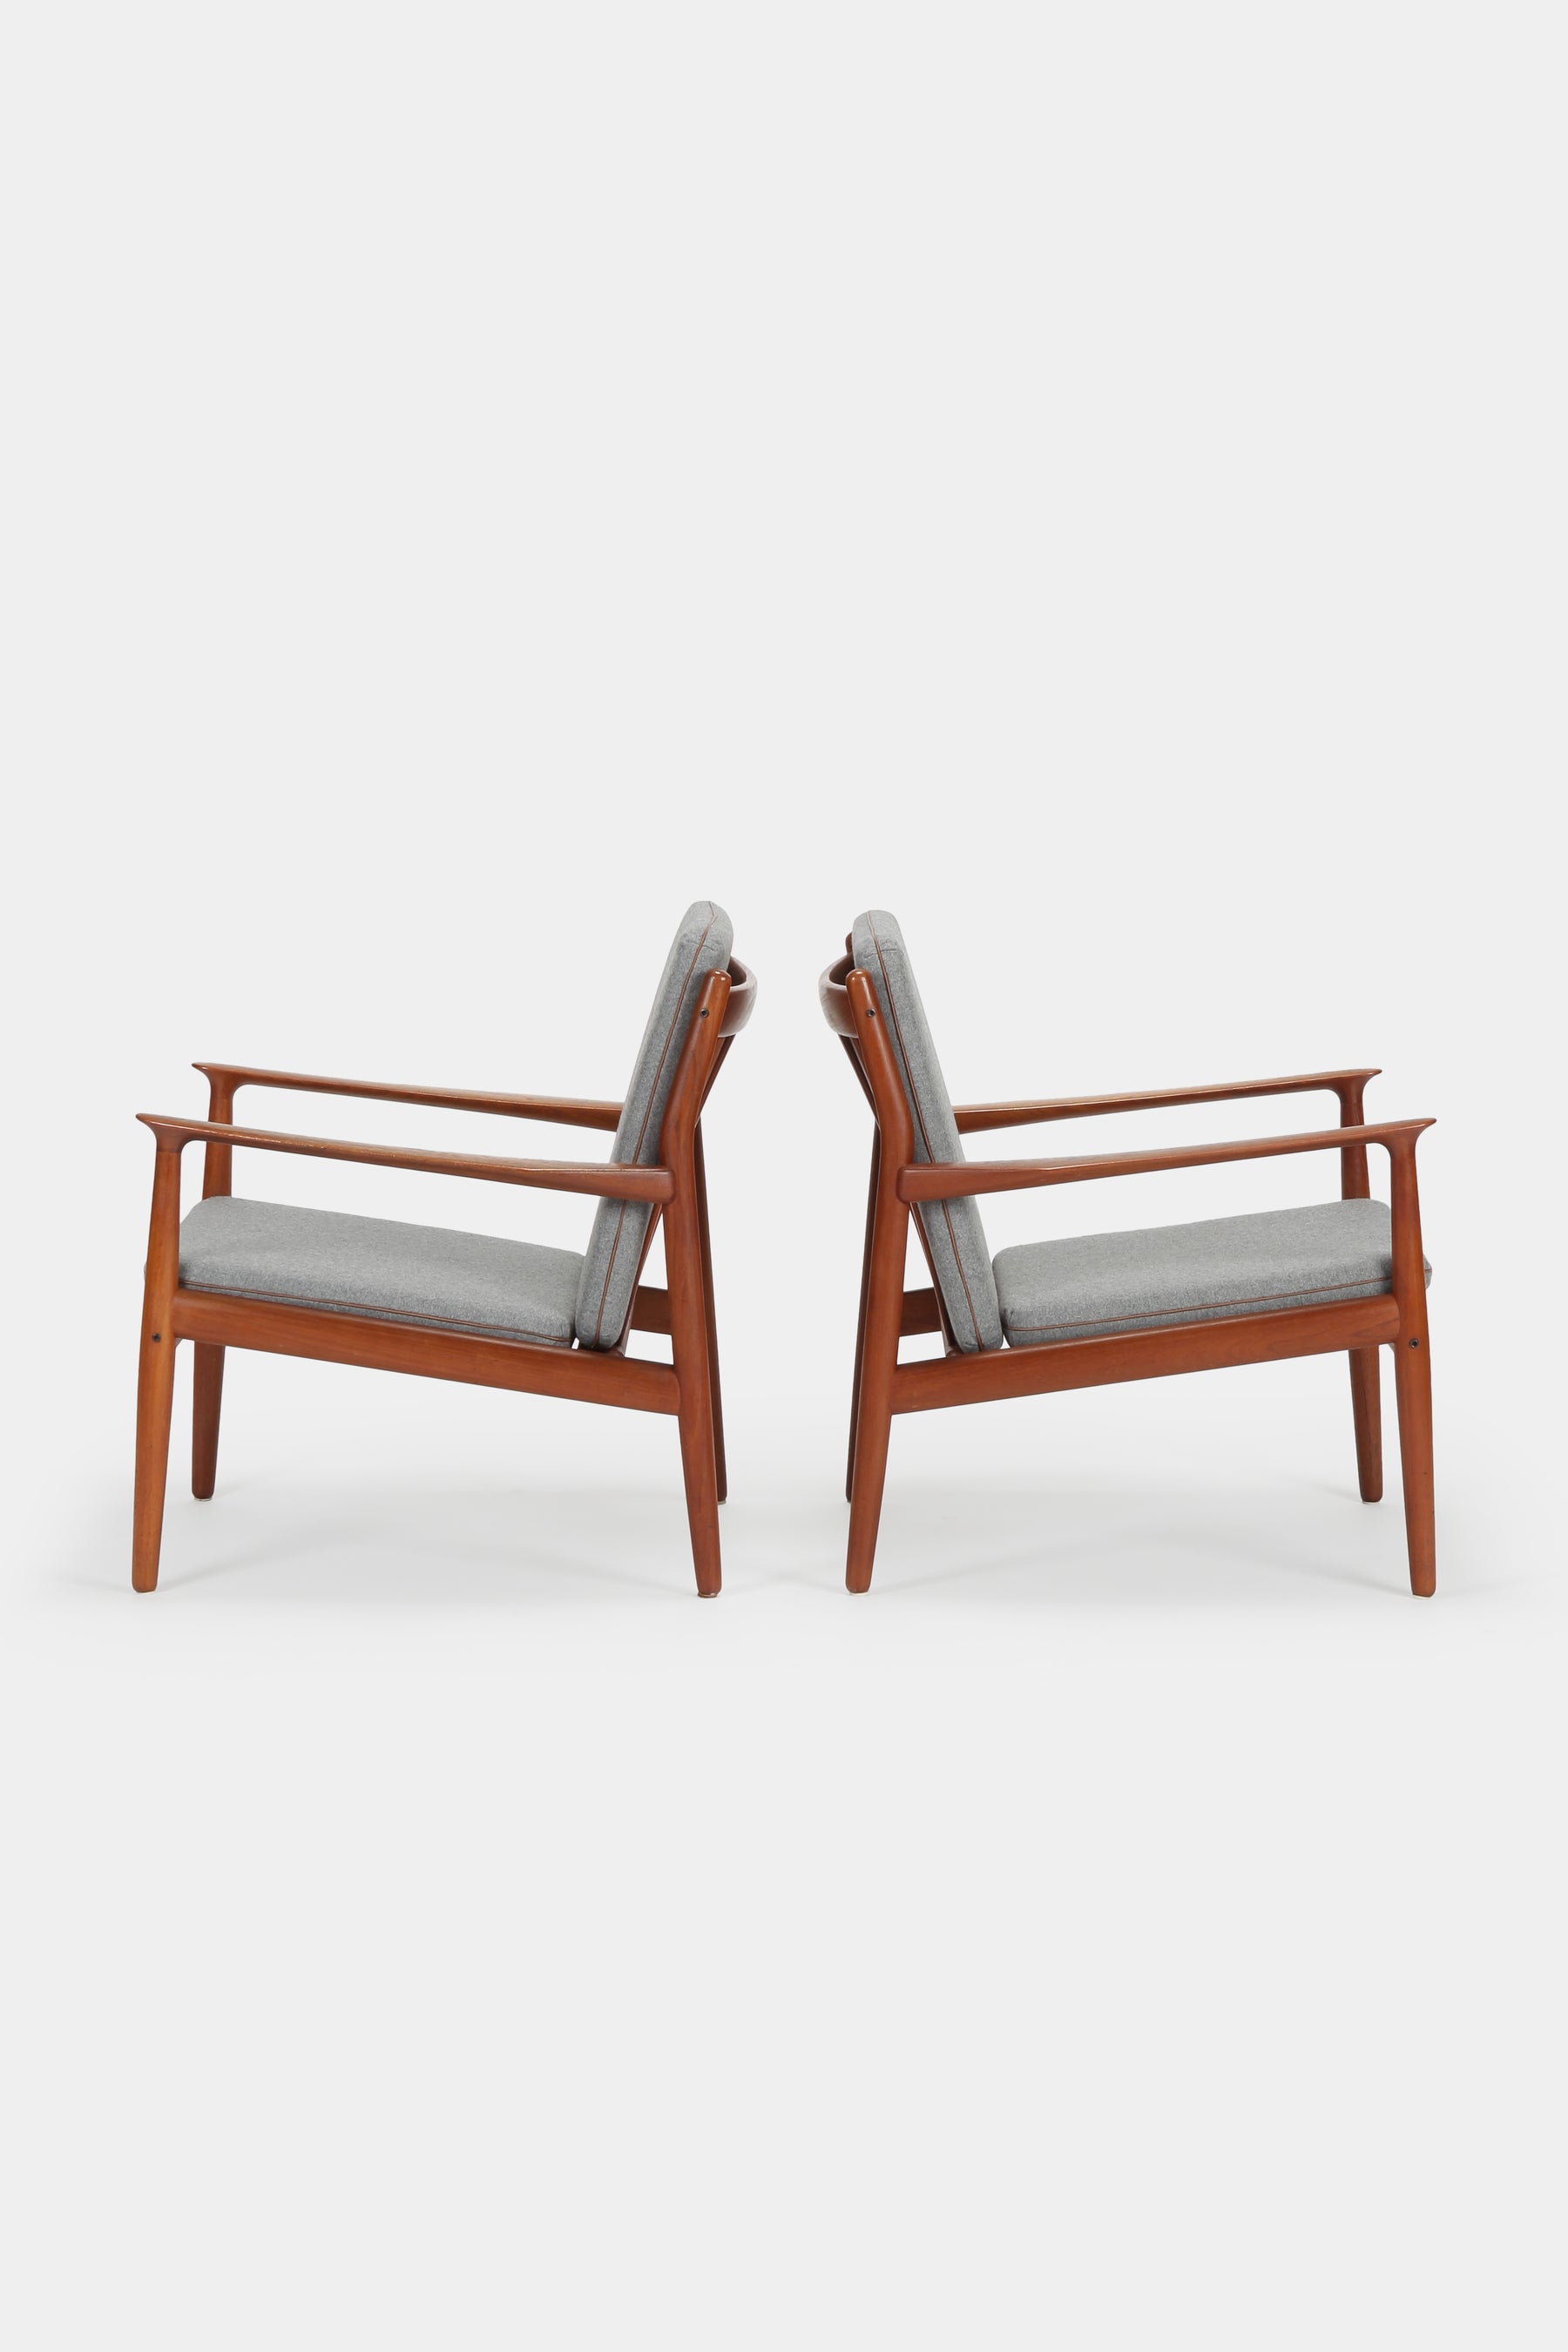 Two beautiful teak armchairs from the 50s, Denmark, designed by Svend Aage Eriksen for the company Glostrup Møbelfabrik. The frame of the armchairs is made of solid teak, the cushions are freshly upholstered with grey flannel fabric framed with leather piping. With additional cushions with light yellow cotton fabric. A total of 8 cushions. Very nice condition.  Dimensions Width: 67 cm | Length: 72 cm | Height: 75 cm  Seat height: 38 cm